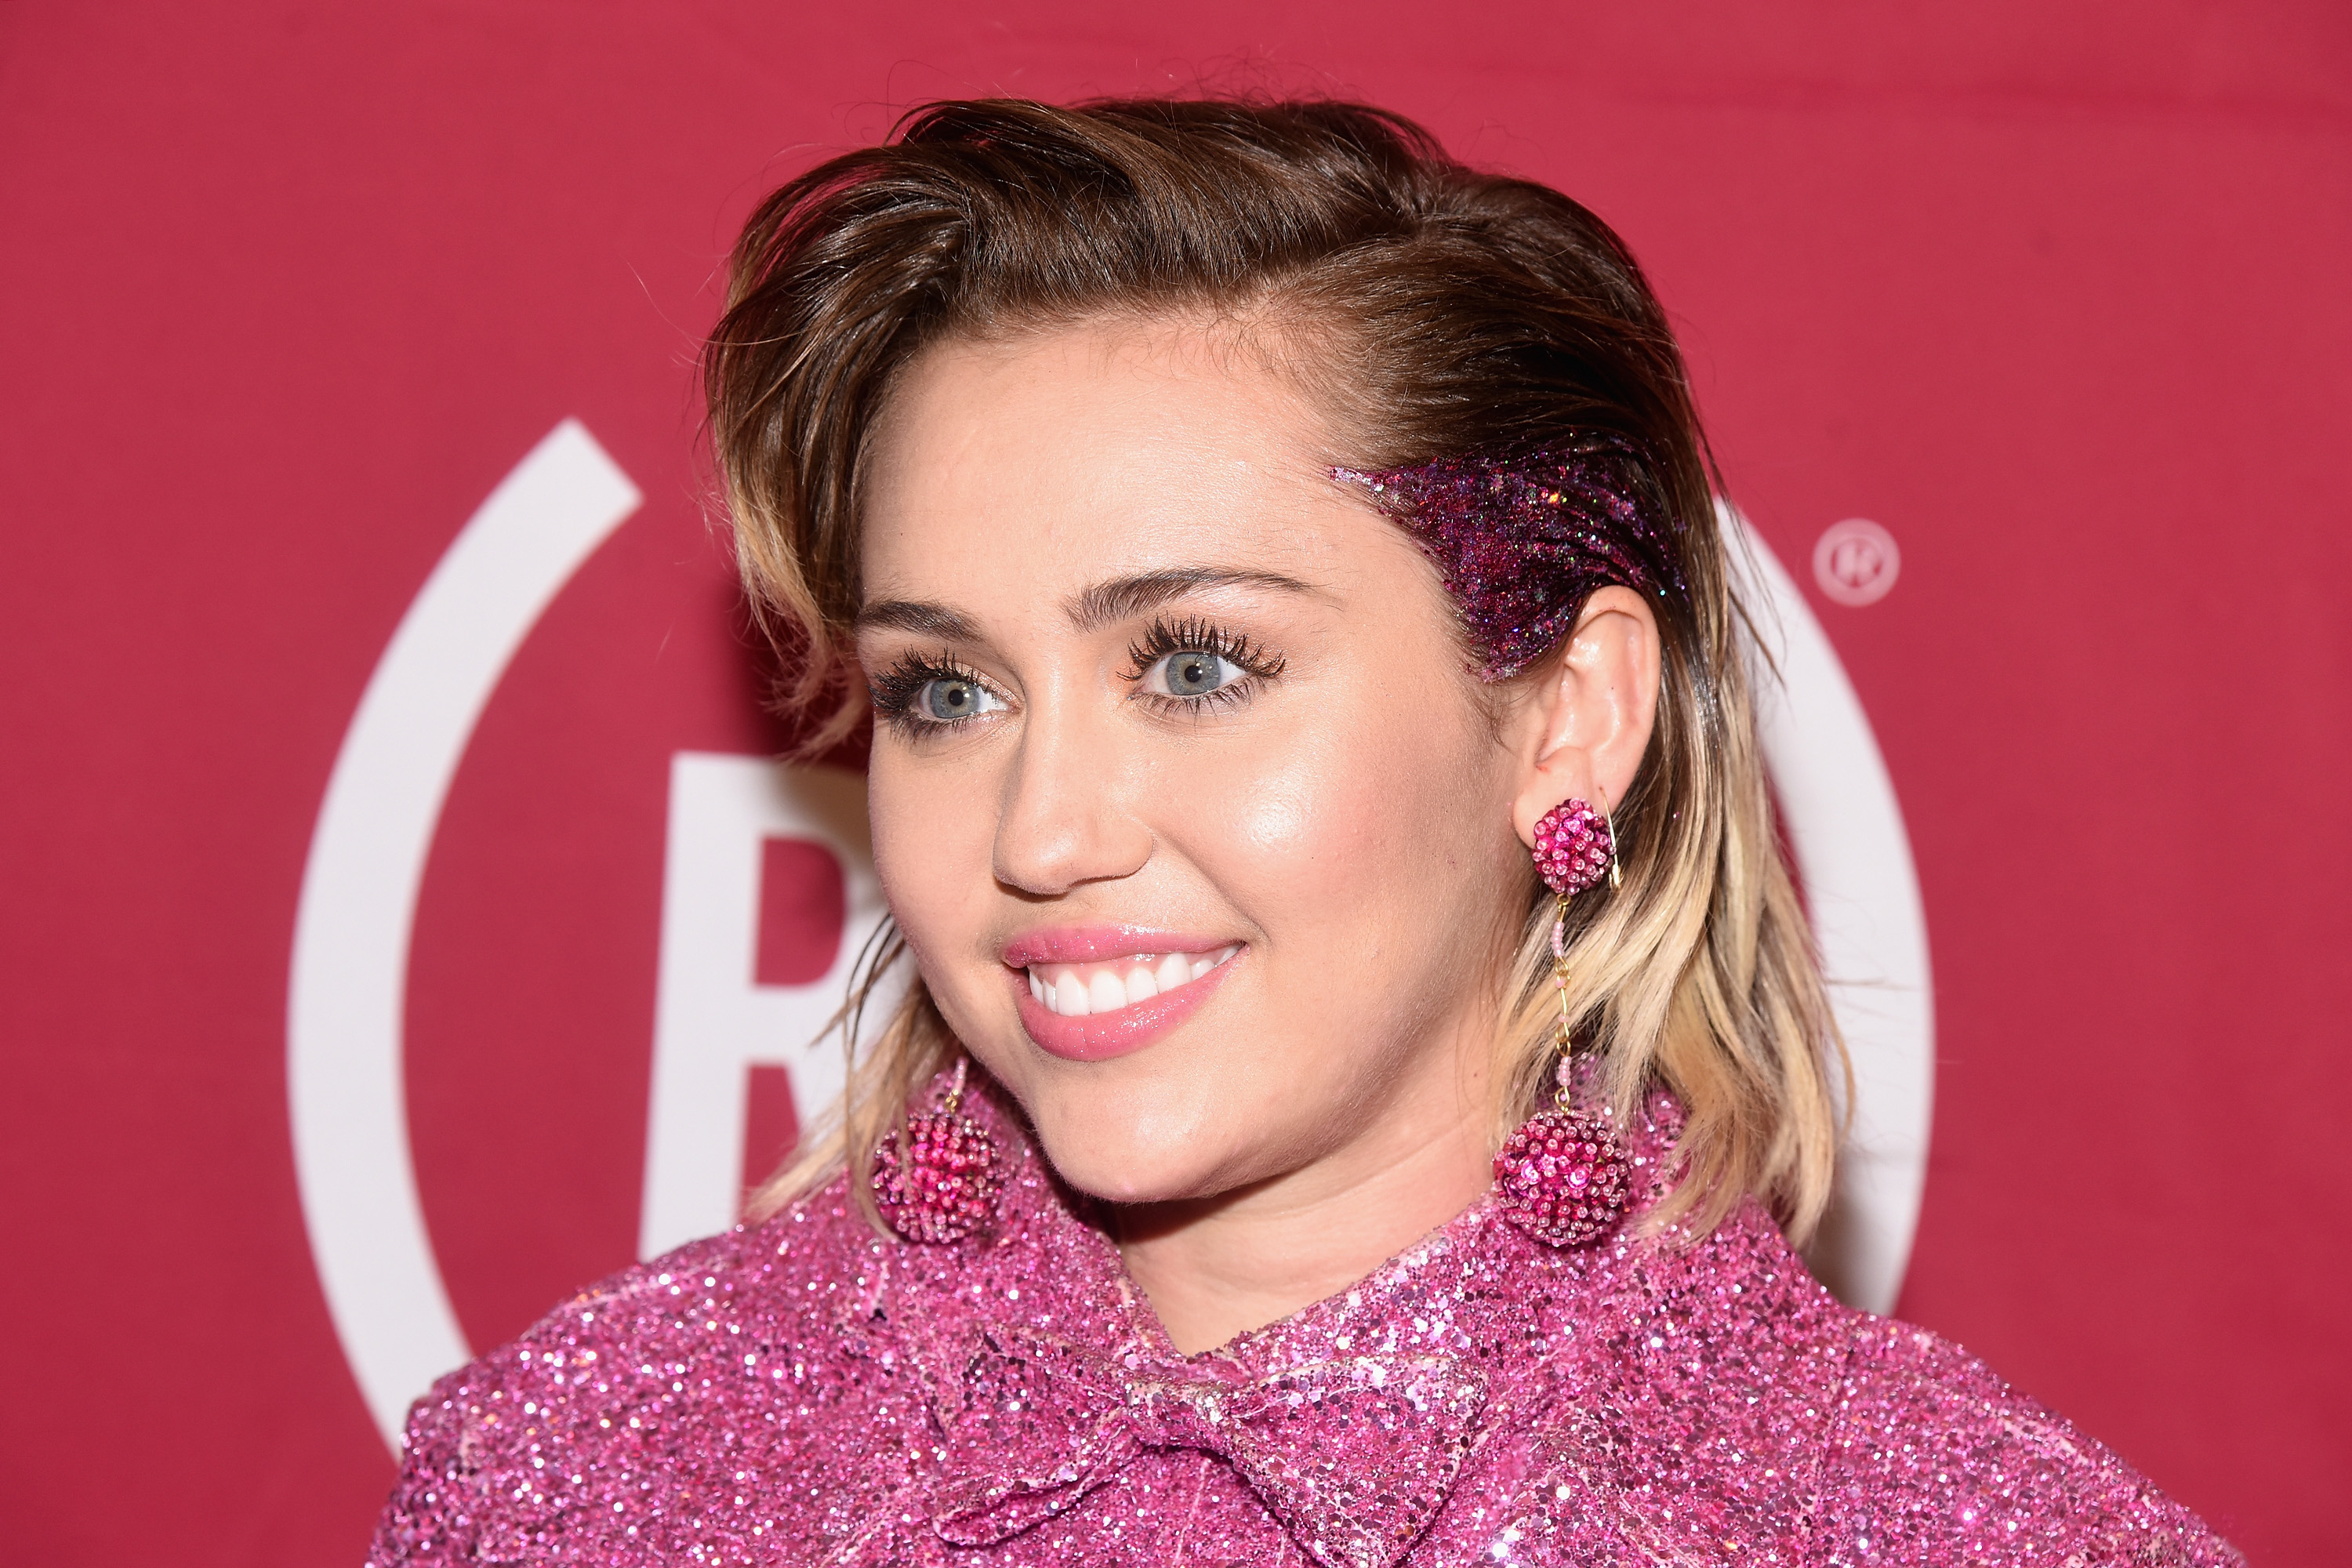 Miley Cyrus & Elsa Pataky Get Matching Tattoos In A Show Of Family Bonding — PHOTOS